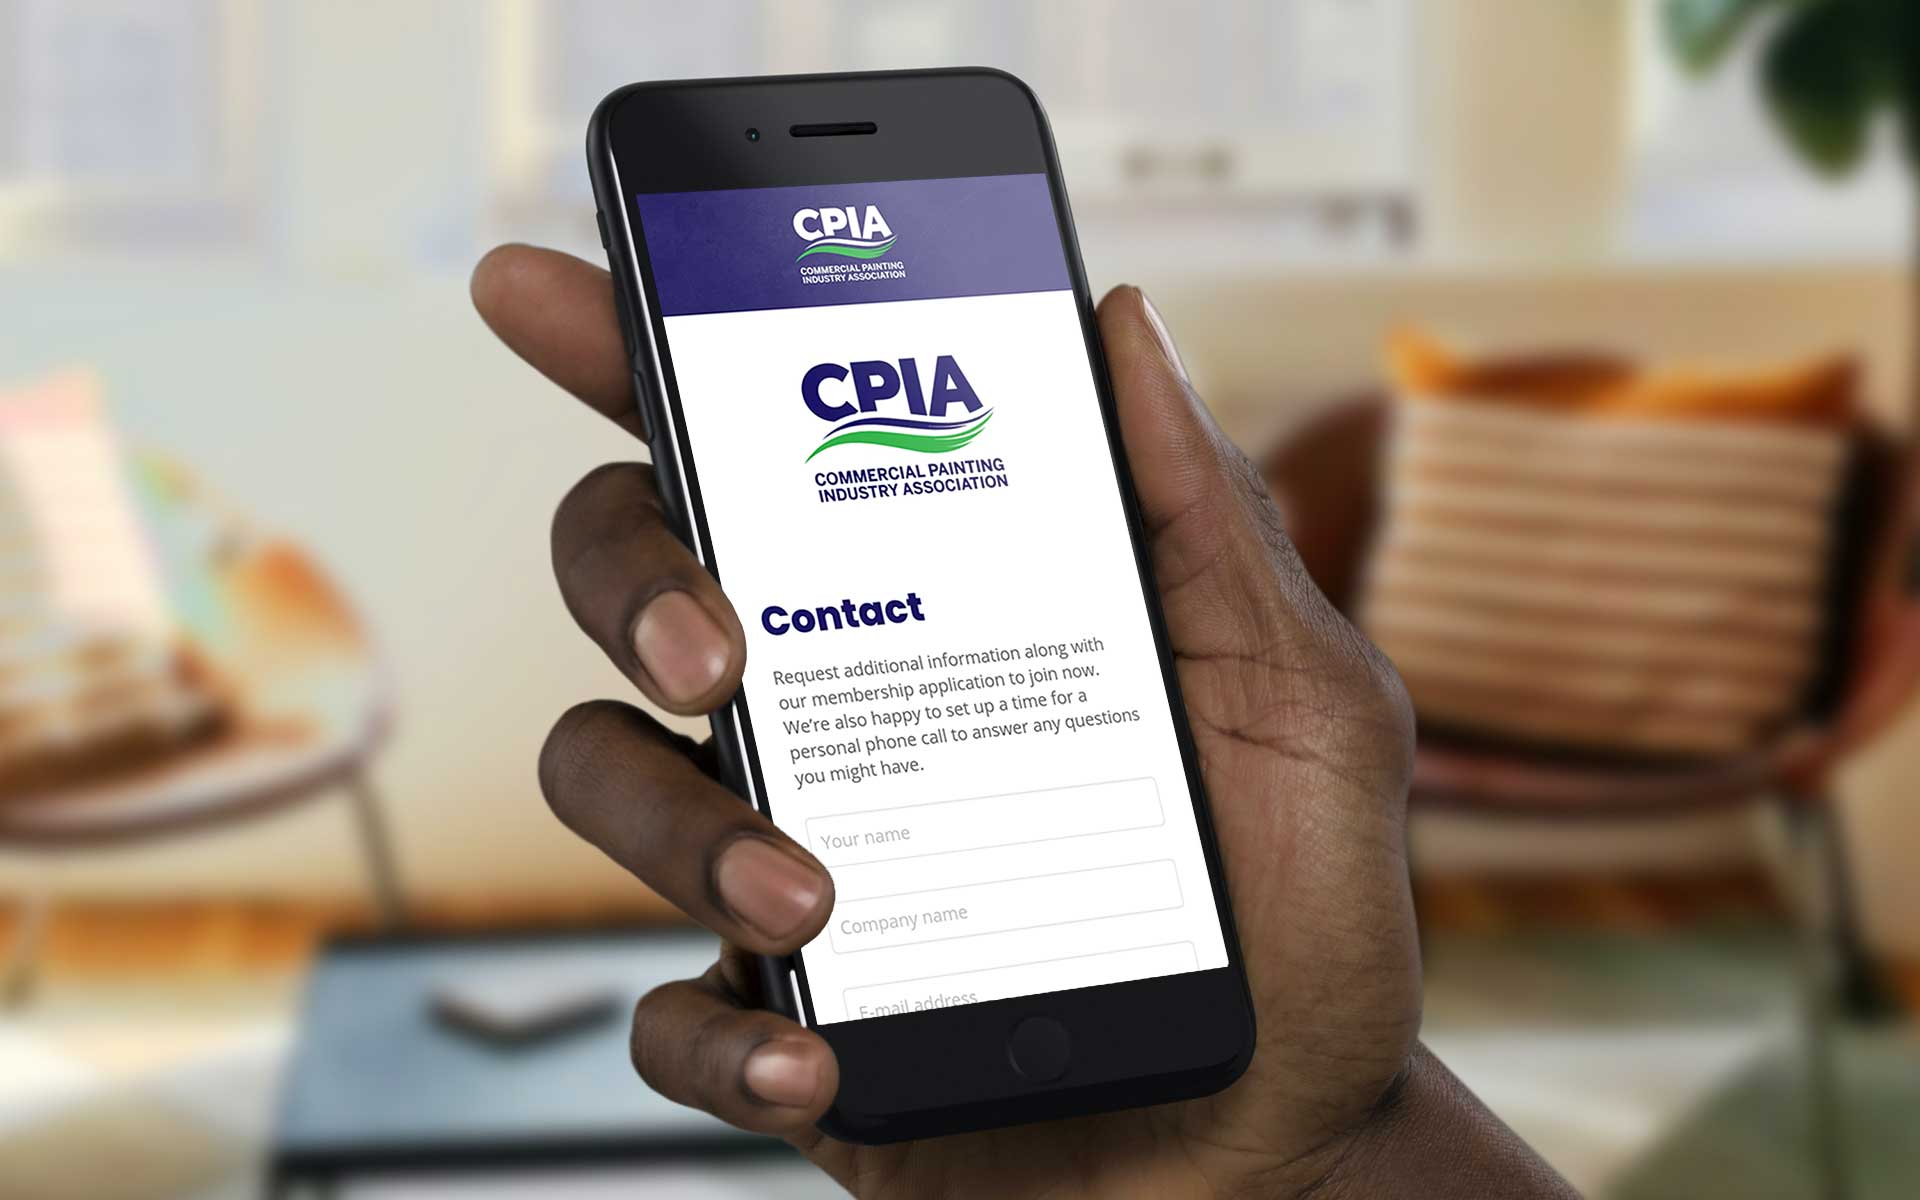 CPIA Contact Us Page on Mobile